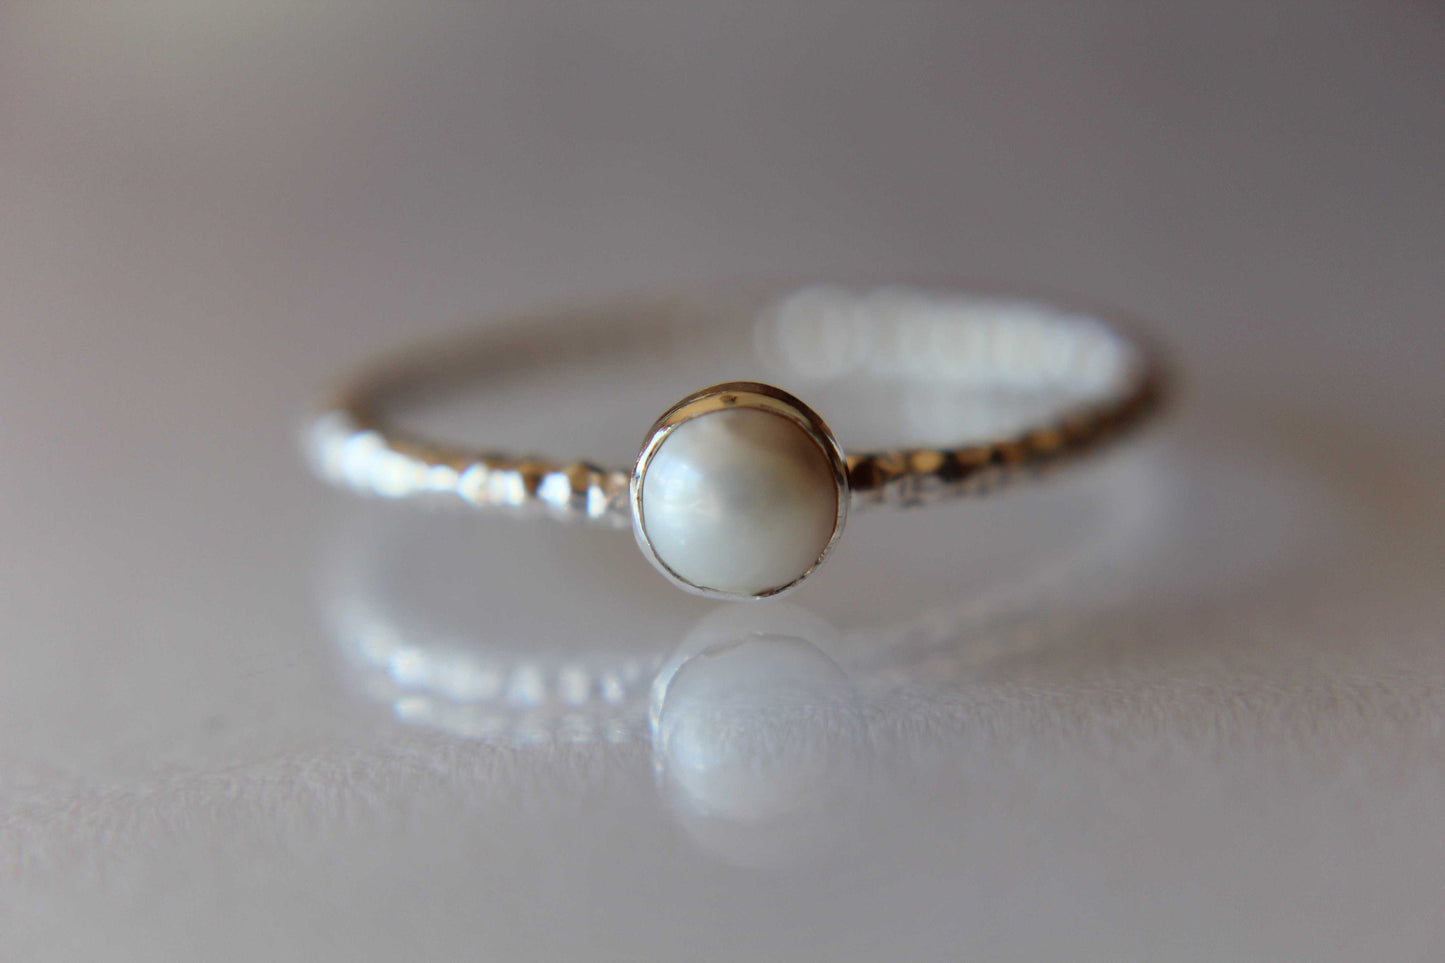 Pearl Ring, White Pearl Ring, Sterling Silver Pearl Ring, Freshwater Pearl Ring, Textured Pearl Ring, June Birthstone, Pearl Jewelry, Gift